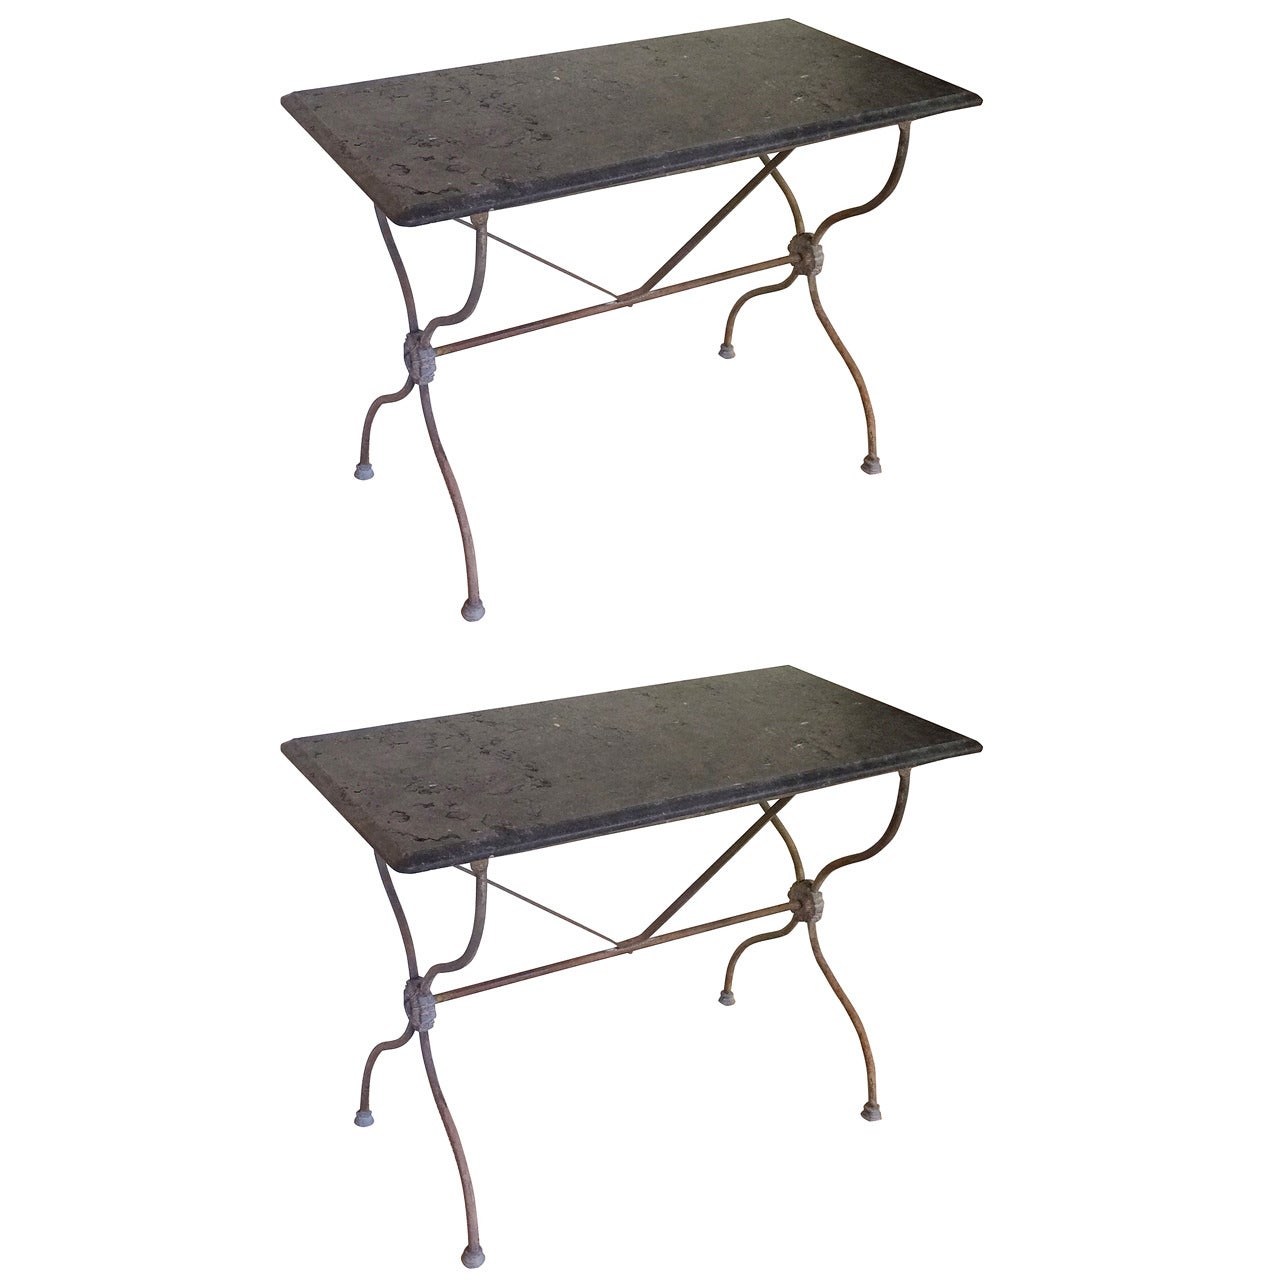 Pair of Directoire Style Garden Tables